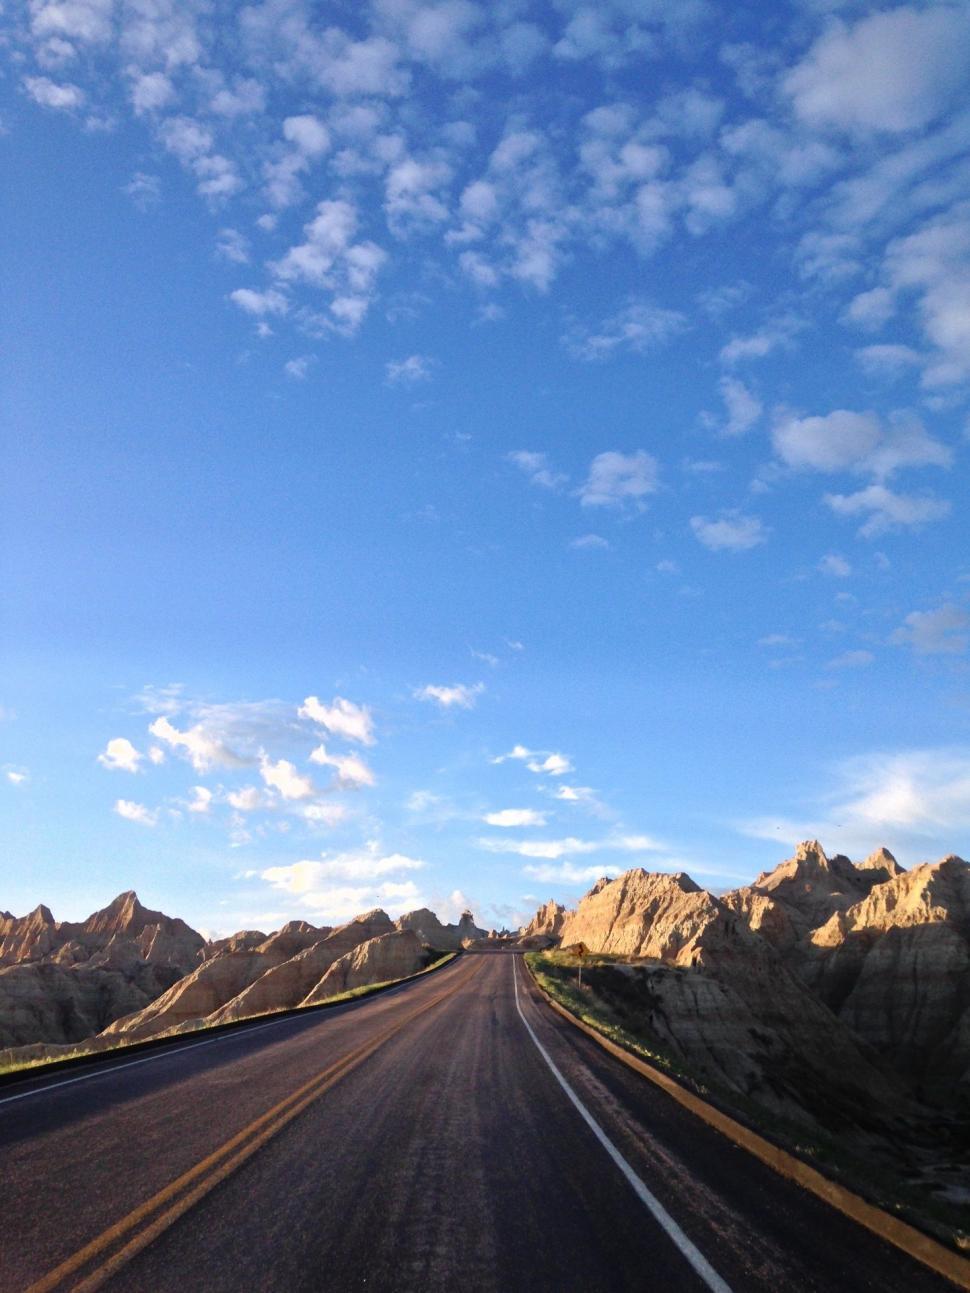 Free Image of Driving Down a Road With Mountains in the Background 